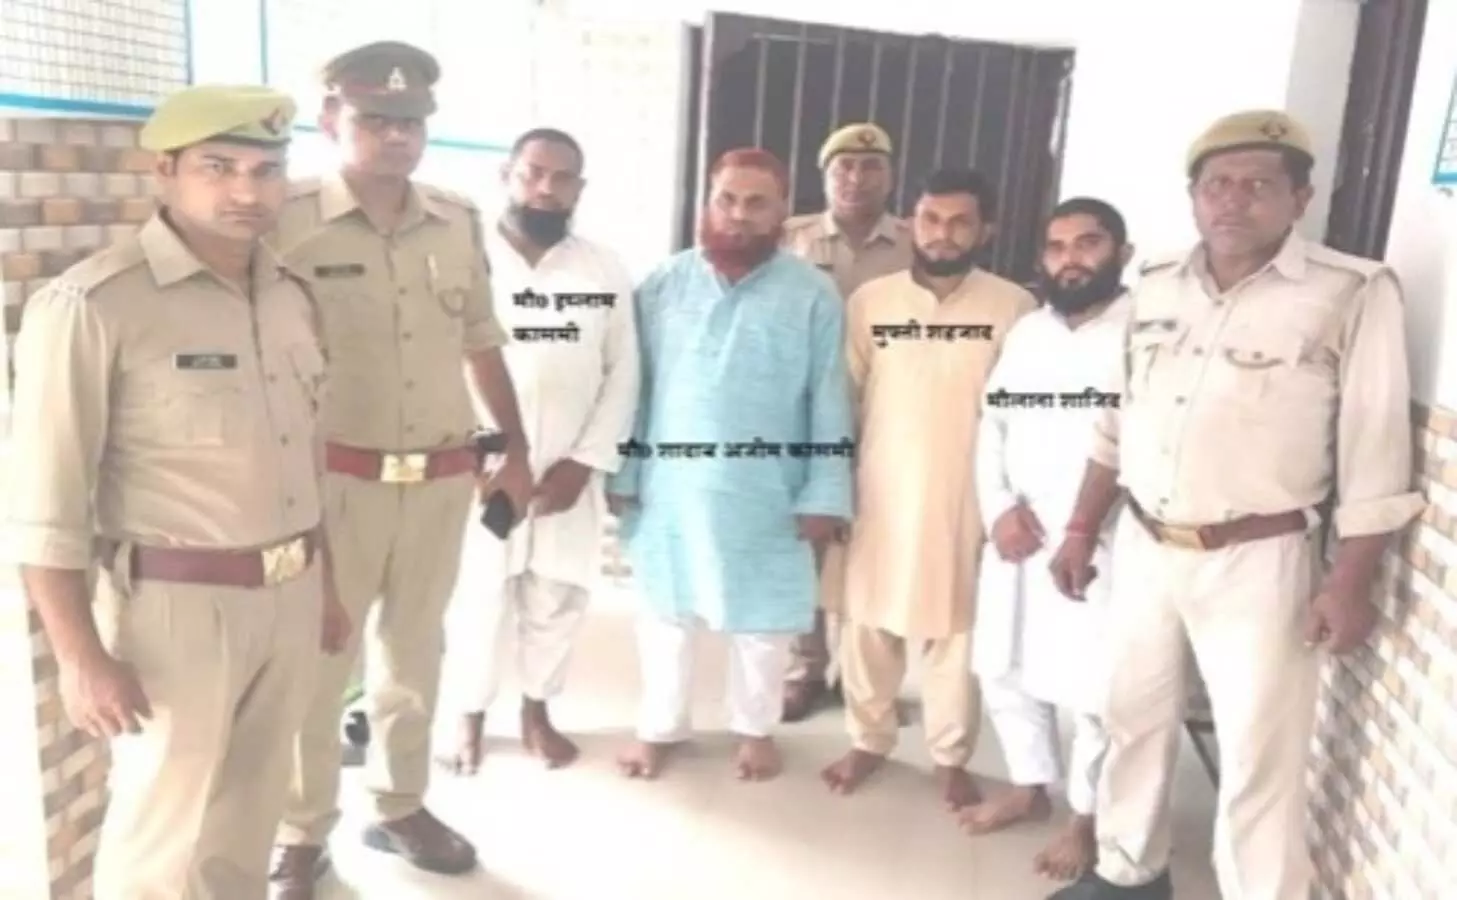 ats and meerut police arrested four members of pfi literature related to ghazwa e hind recovered